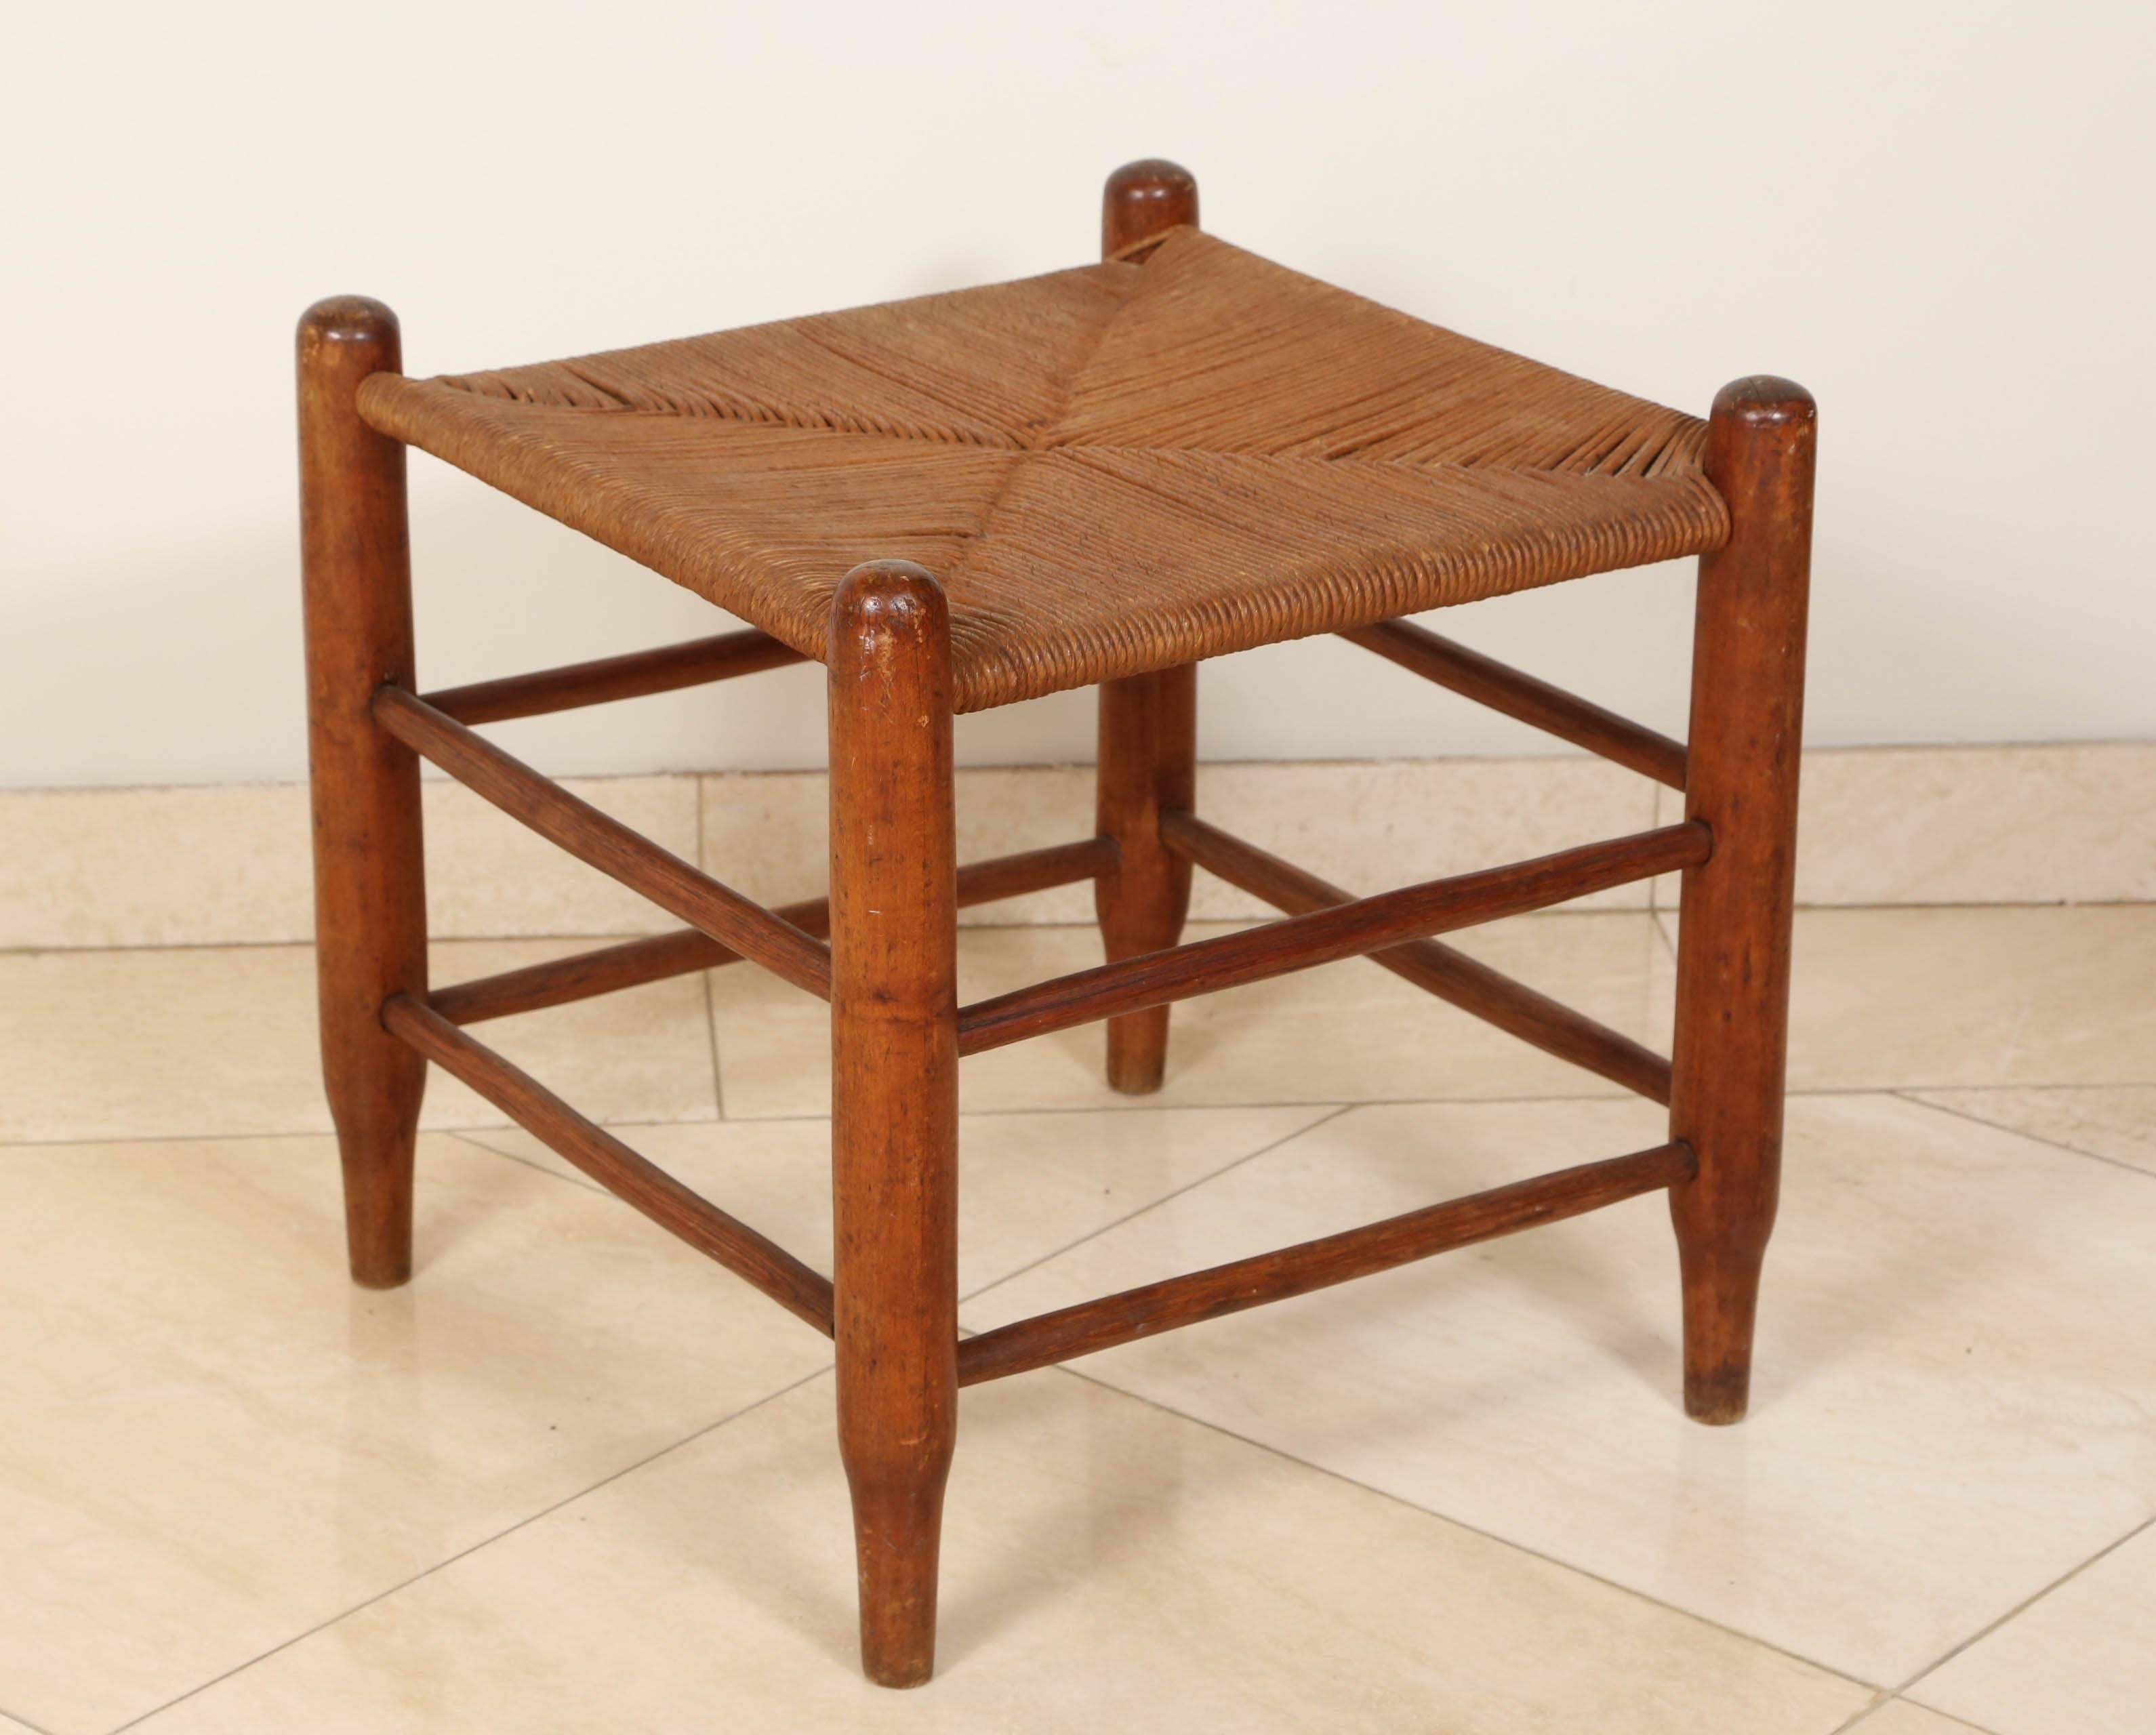 Wooden country oak stool with woven reed seating, four legs.
Charlotte Perriand style.
French provincial country stool, great to use as a foot stool or extra seat.
Nice patina and French country look.